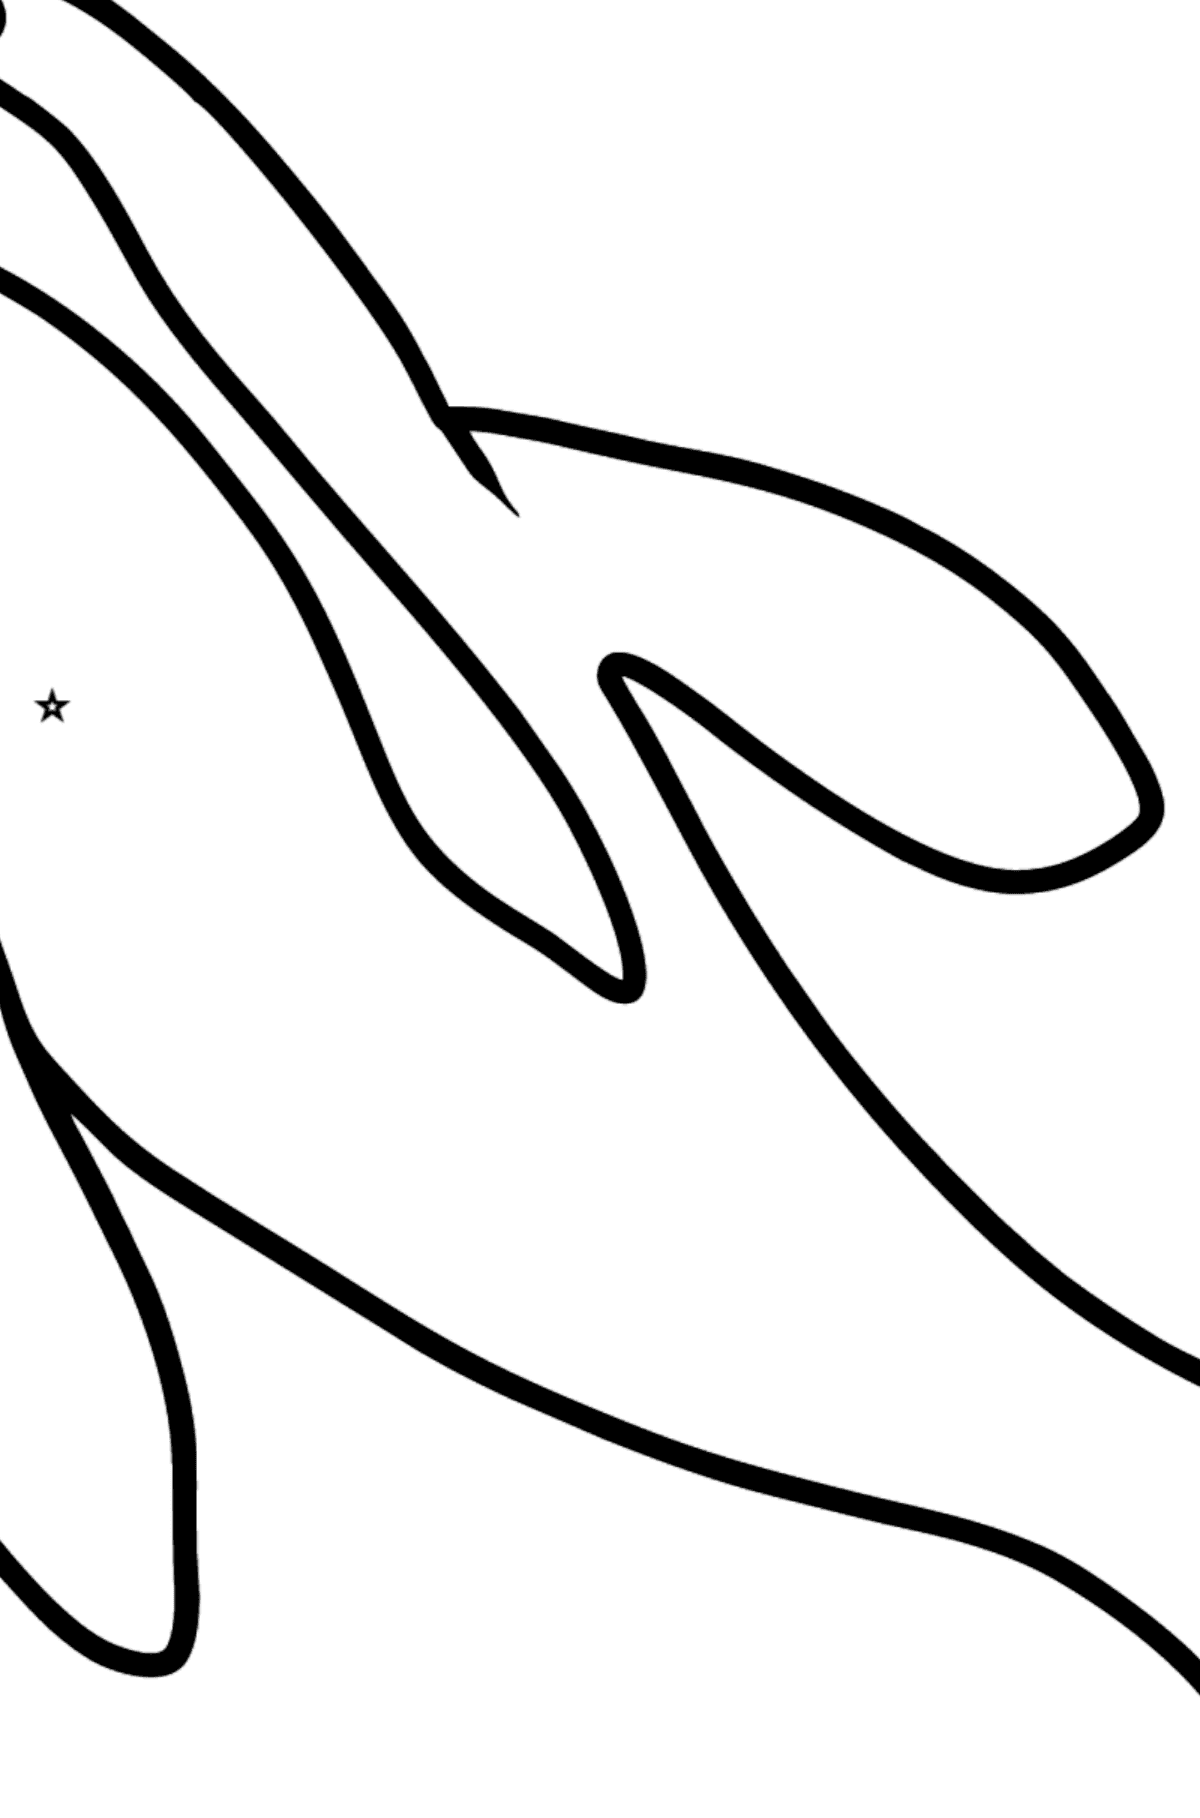 Dolphin coloring page - Coloring by Geometric Shapes for Kids